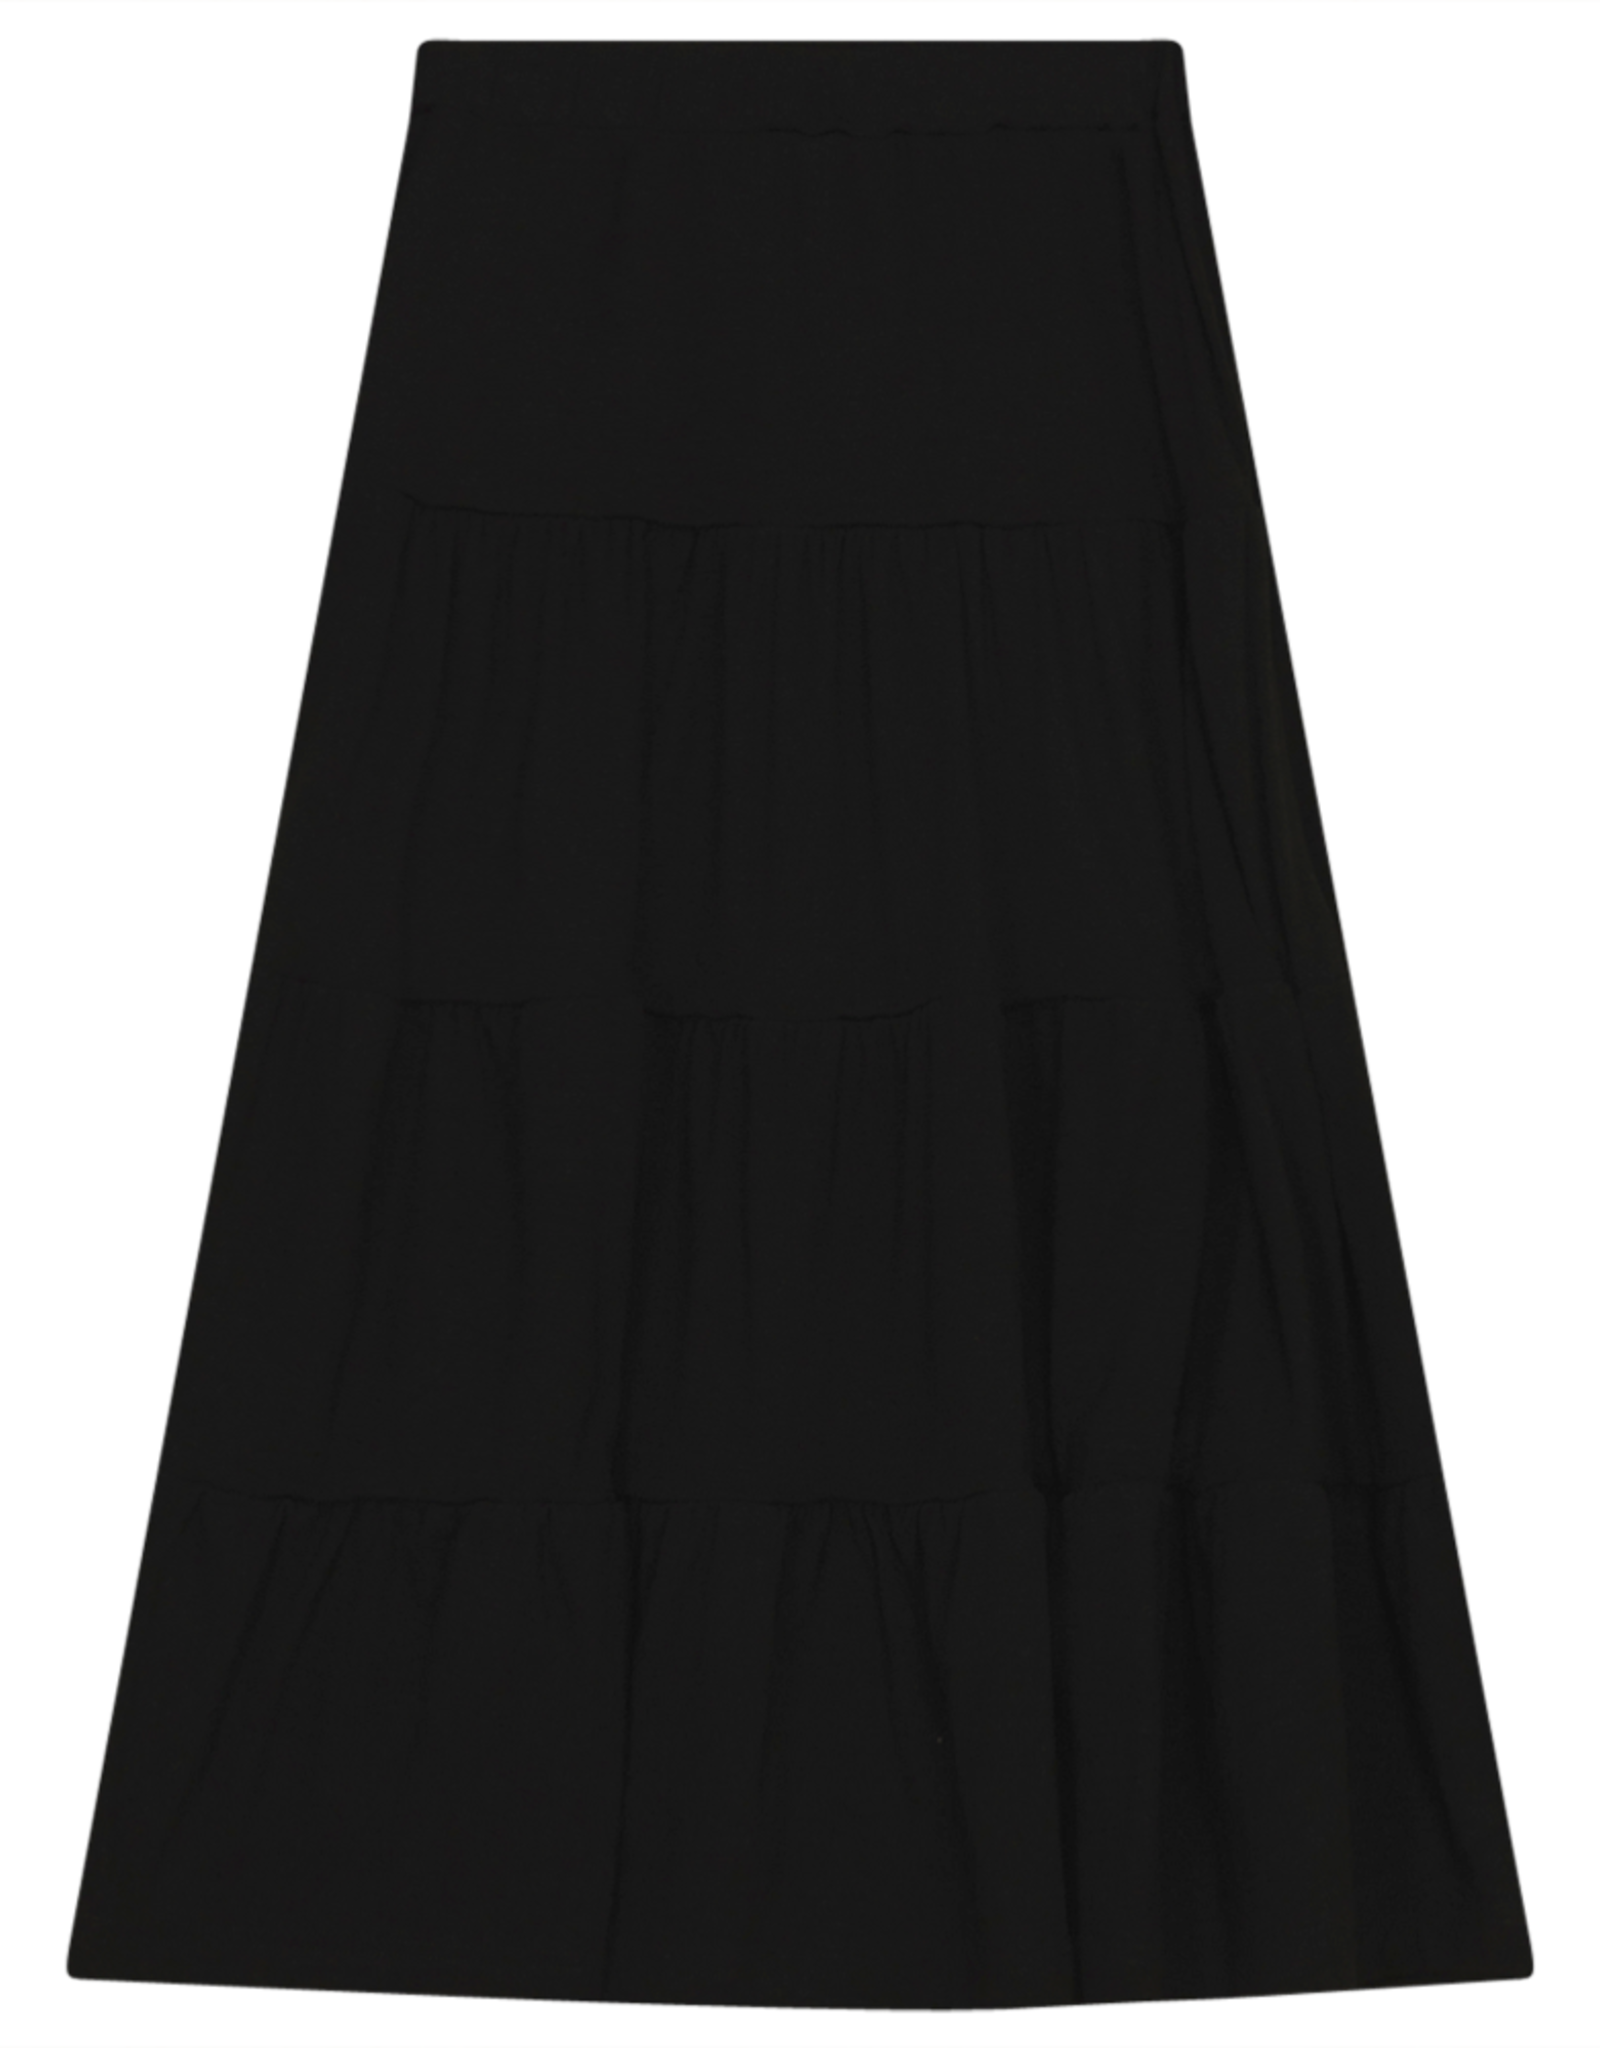 UNCLEAR Unclear Teens Tiered Solid Skirt